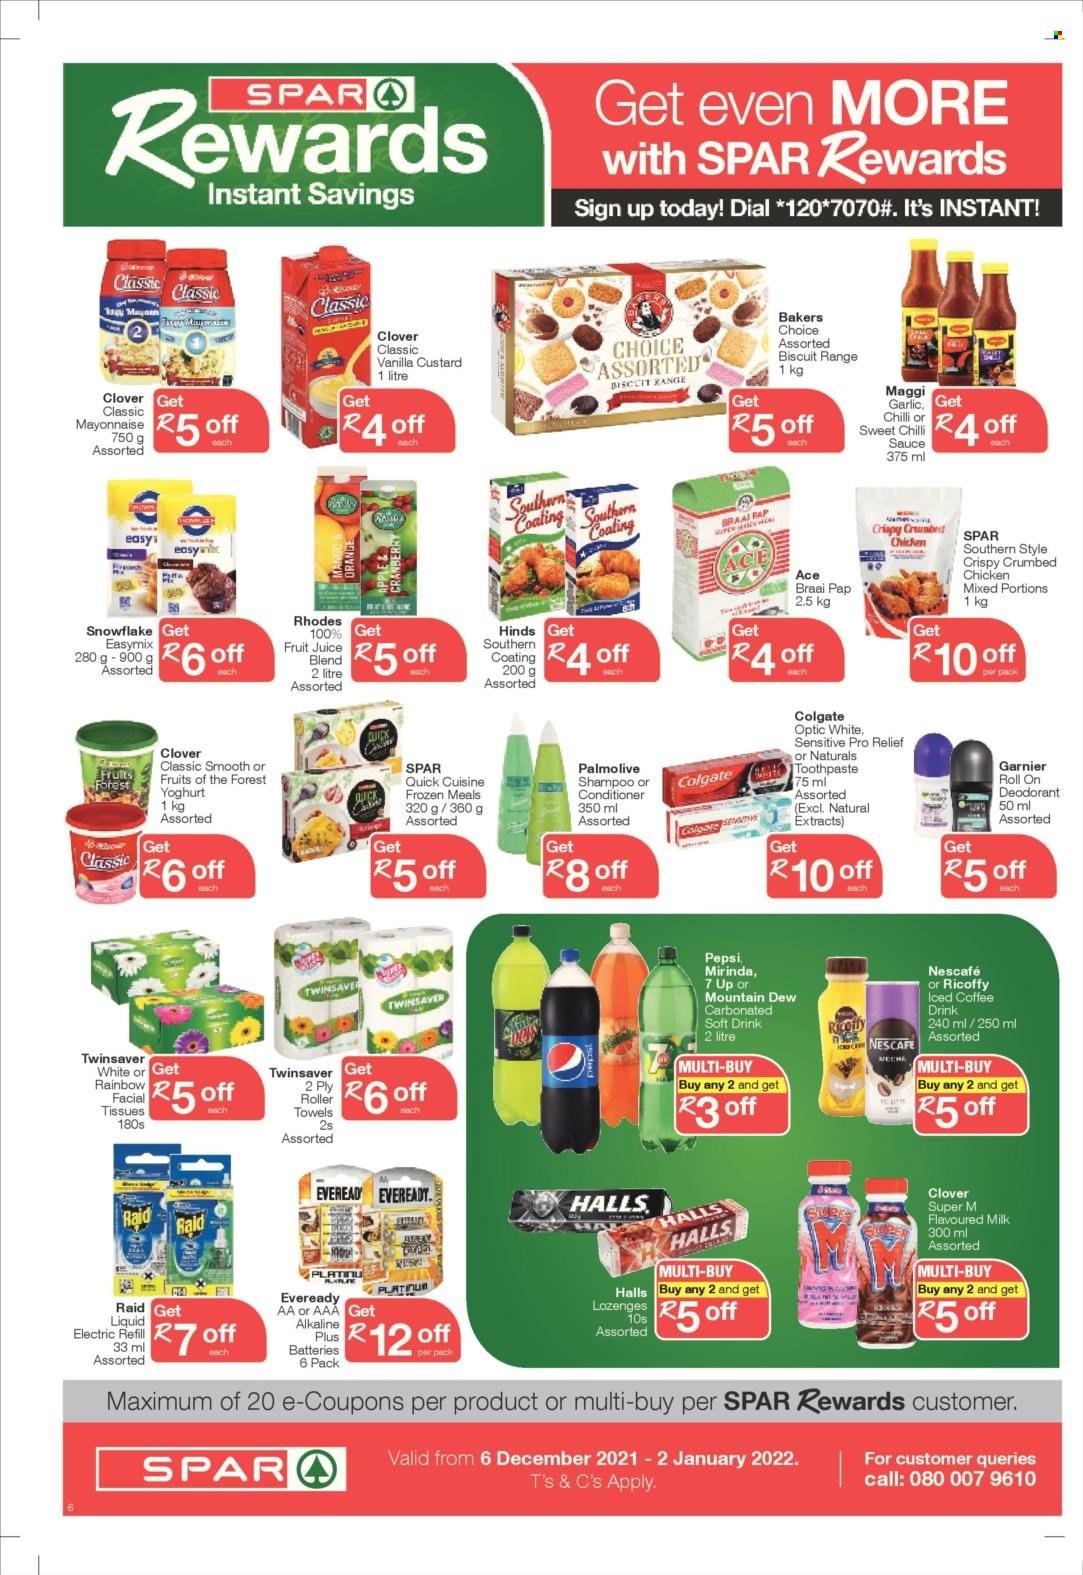 SPAR catalogue  - 13/12/2021 - 26/12/2021 - Sales products - Ace, garlic, sauce, custard, yoghurt, Clover, milk, flavoured milk, mayonnaise, Halls, biscuit, Maggi, Southern Coating, Hinds, chilli sauce, sweet chilli sauce, Mountain Dew, Pepsi, fruit juice, juice, soft drink, 7UP, iced coffee, carbonated soft drink, Ricoffy, Nescafé, tissues, shampoo, Palmolive, Dial, Colgate, toothpaste, Garnier, conditioner, anti-perspirant, roll-on, deodorant, Raid, Bakers, braai. Page 6.